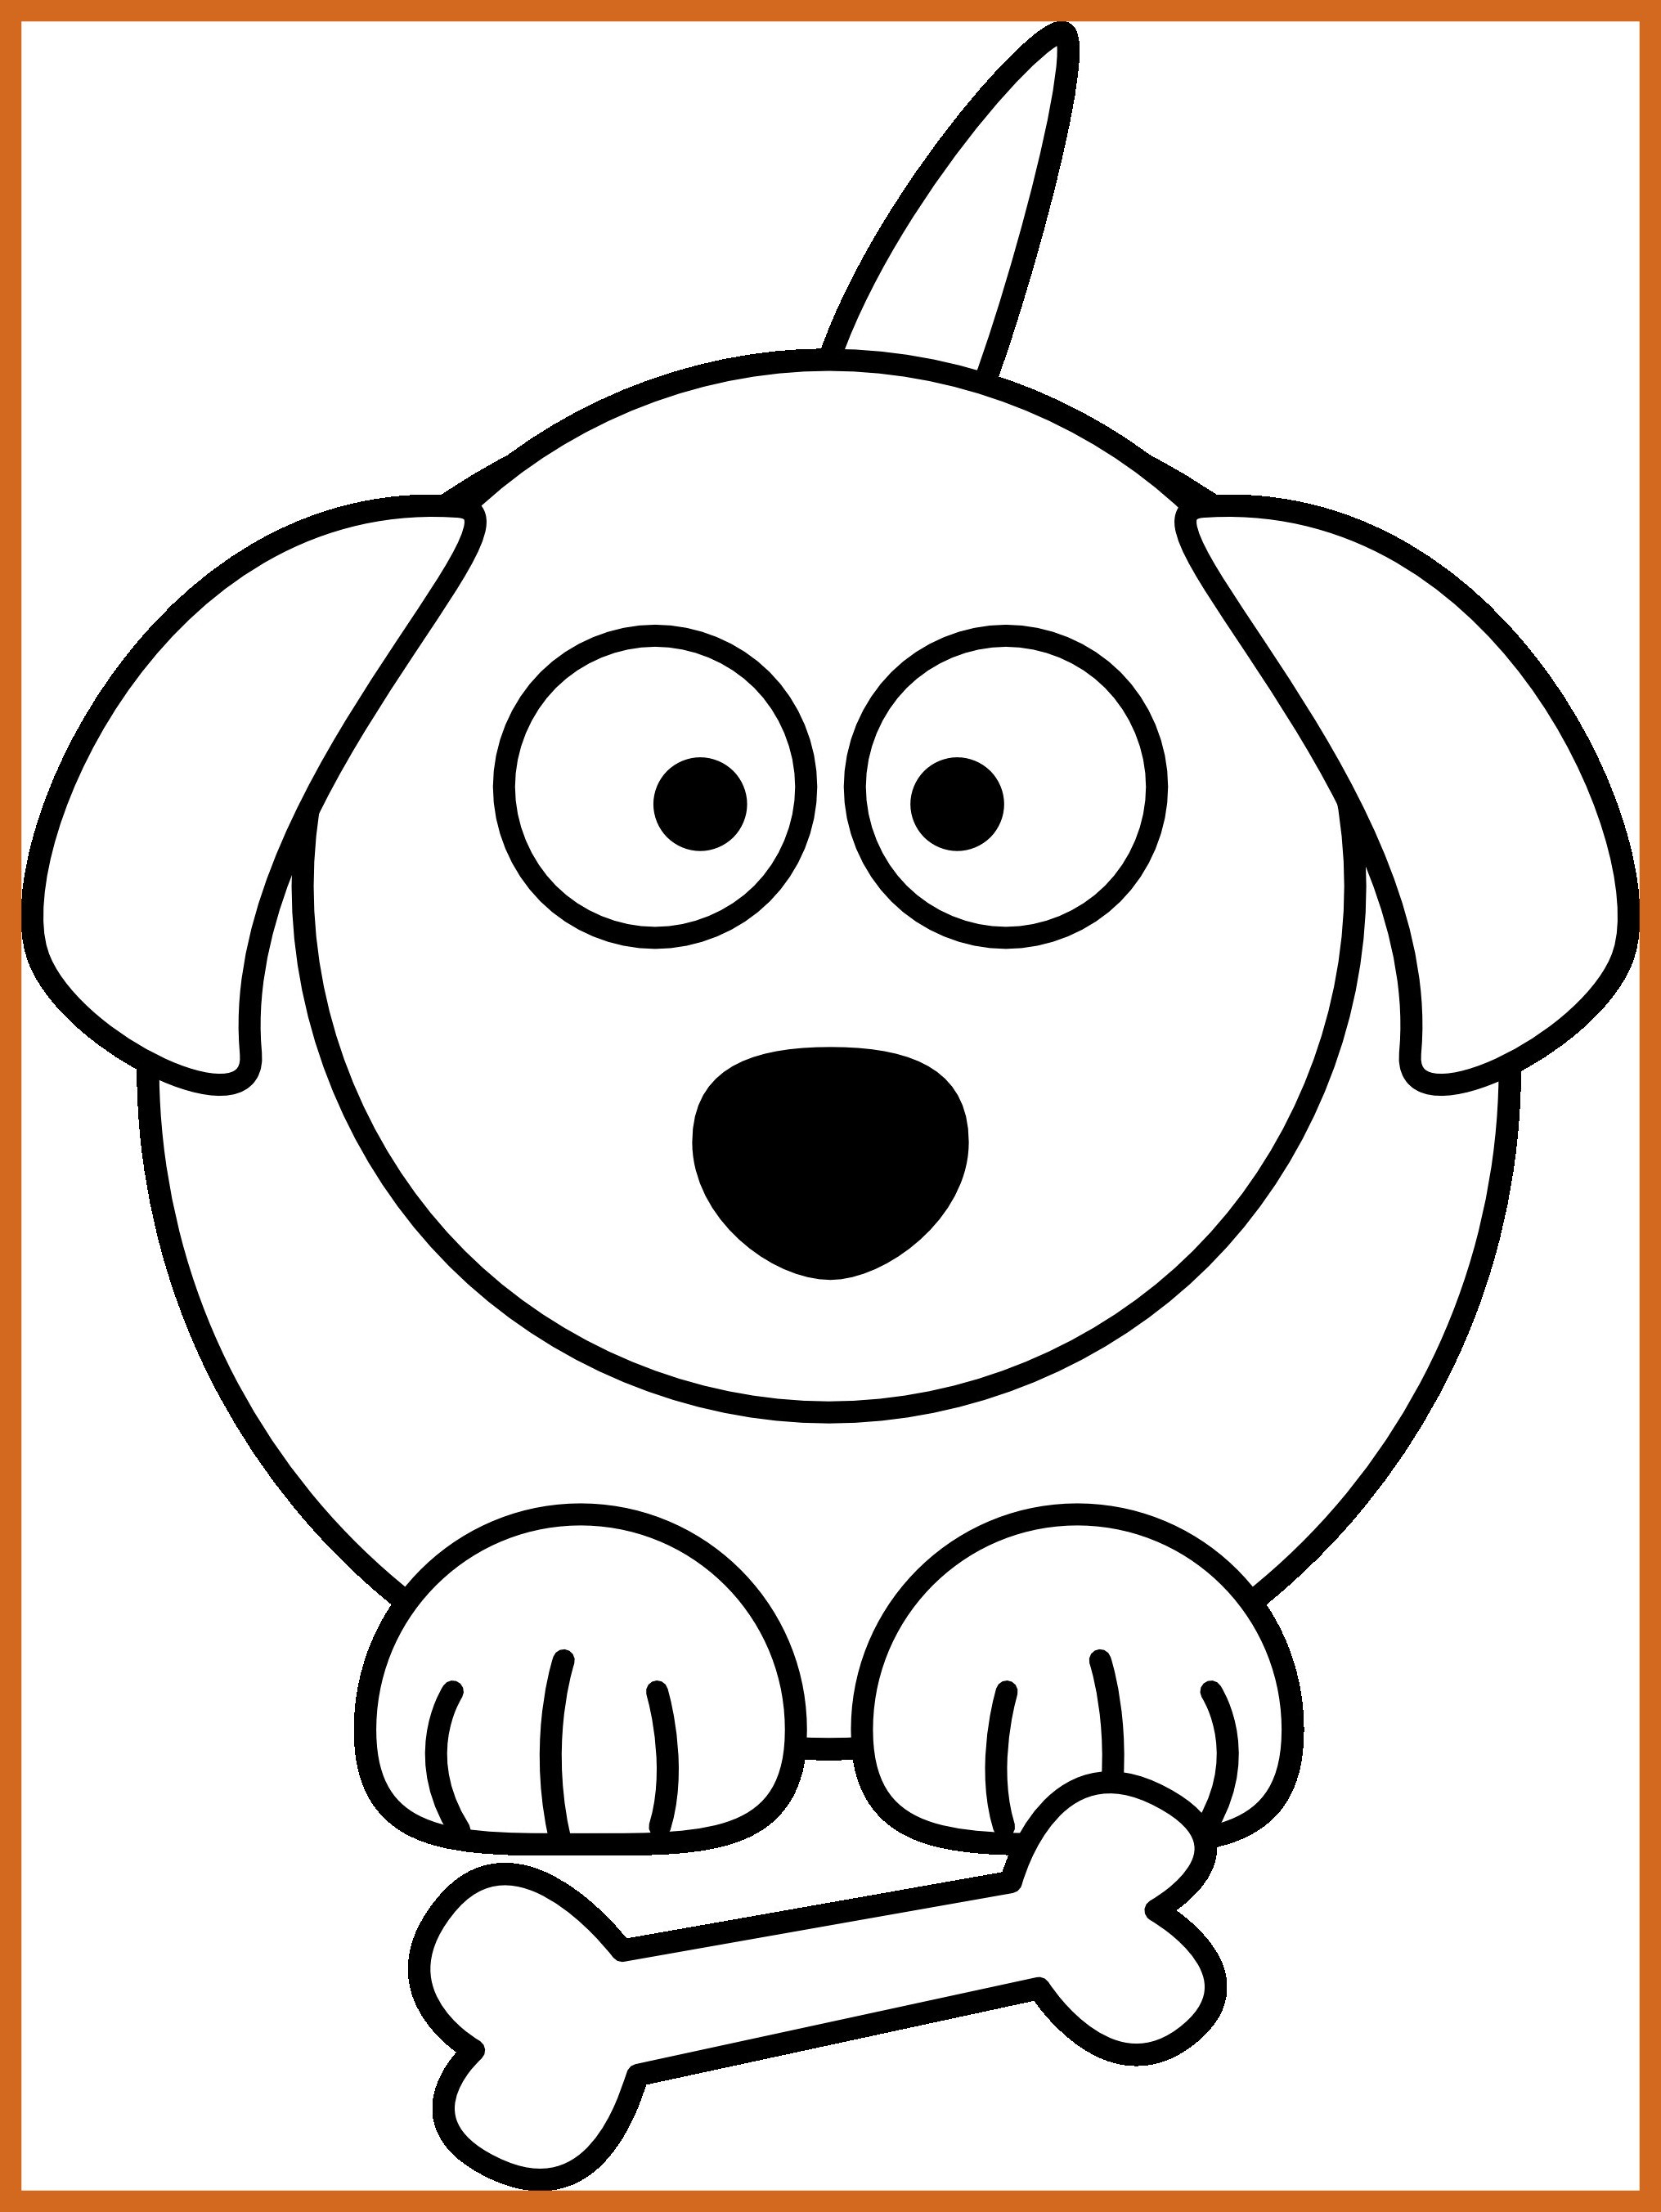 Cute Animals With Big Eyes Coloring Pages at GetColorings.com   Free ...